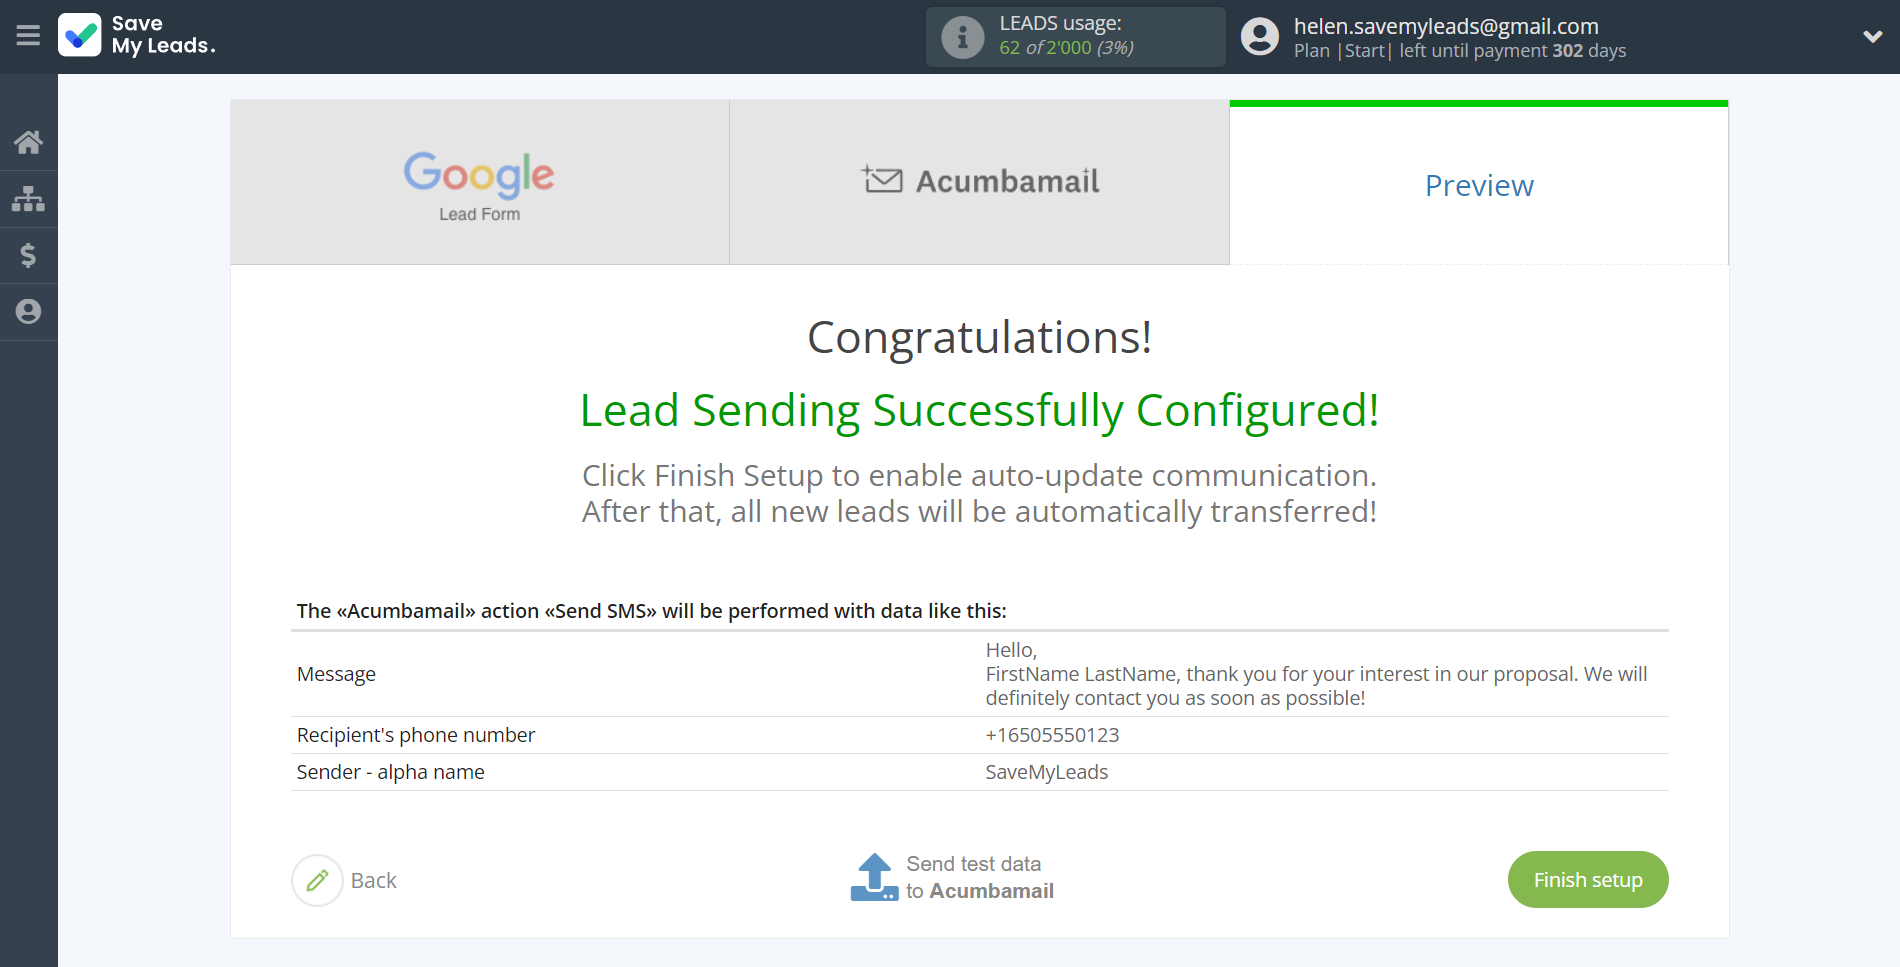 How to Connect Google Lead Form with Acumbamail Send SMS | Test data